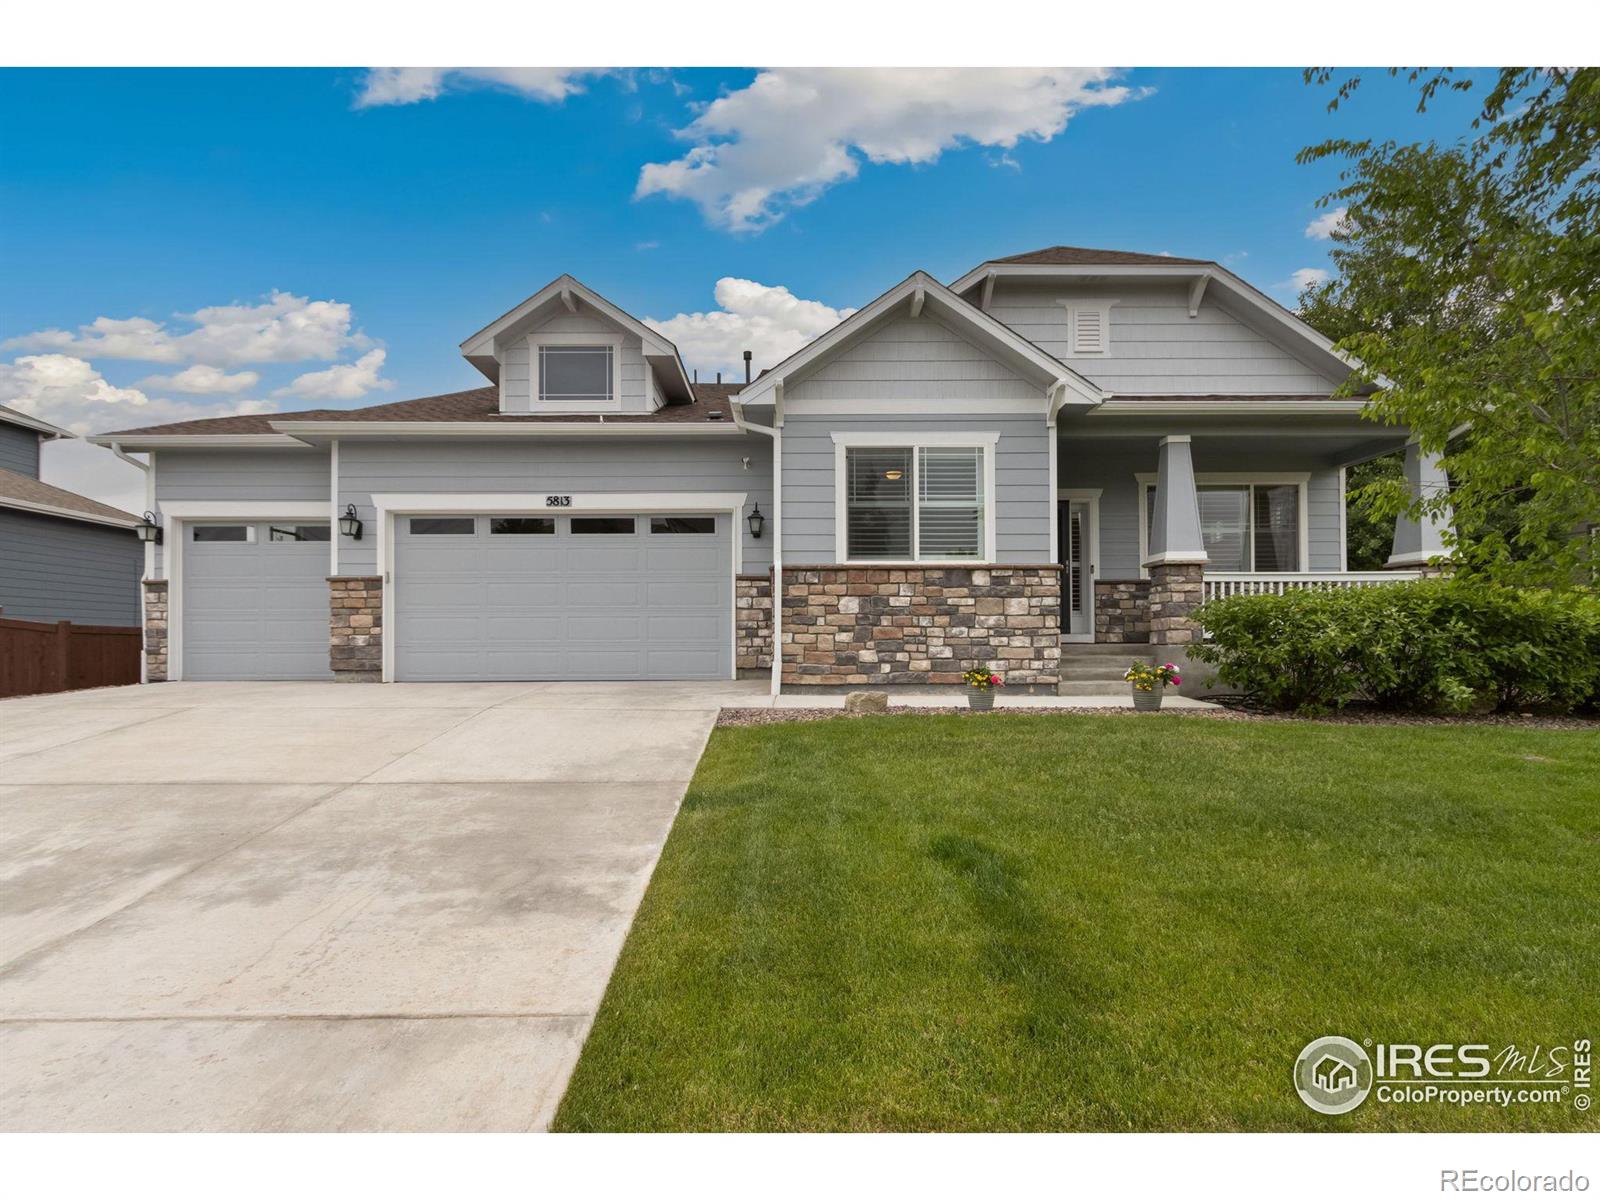 5813  glendive lane, timnath sold home. Closed on 2024-07-15 for $770,000.